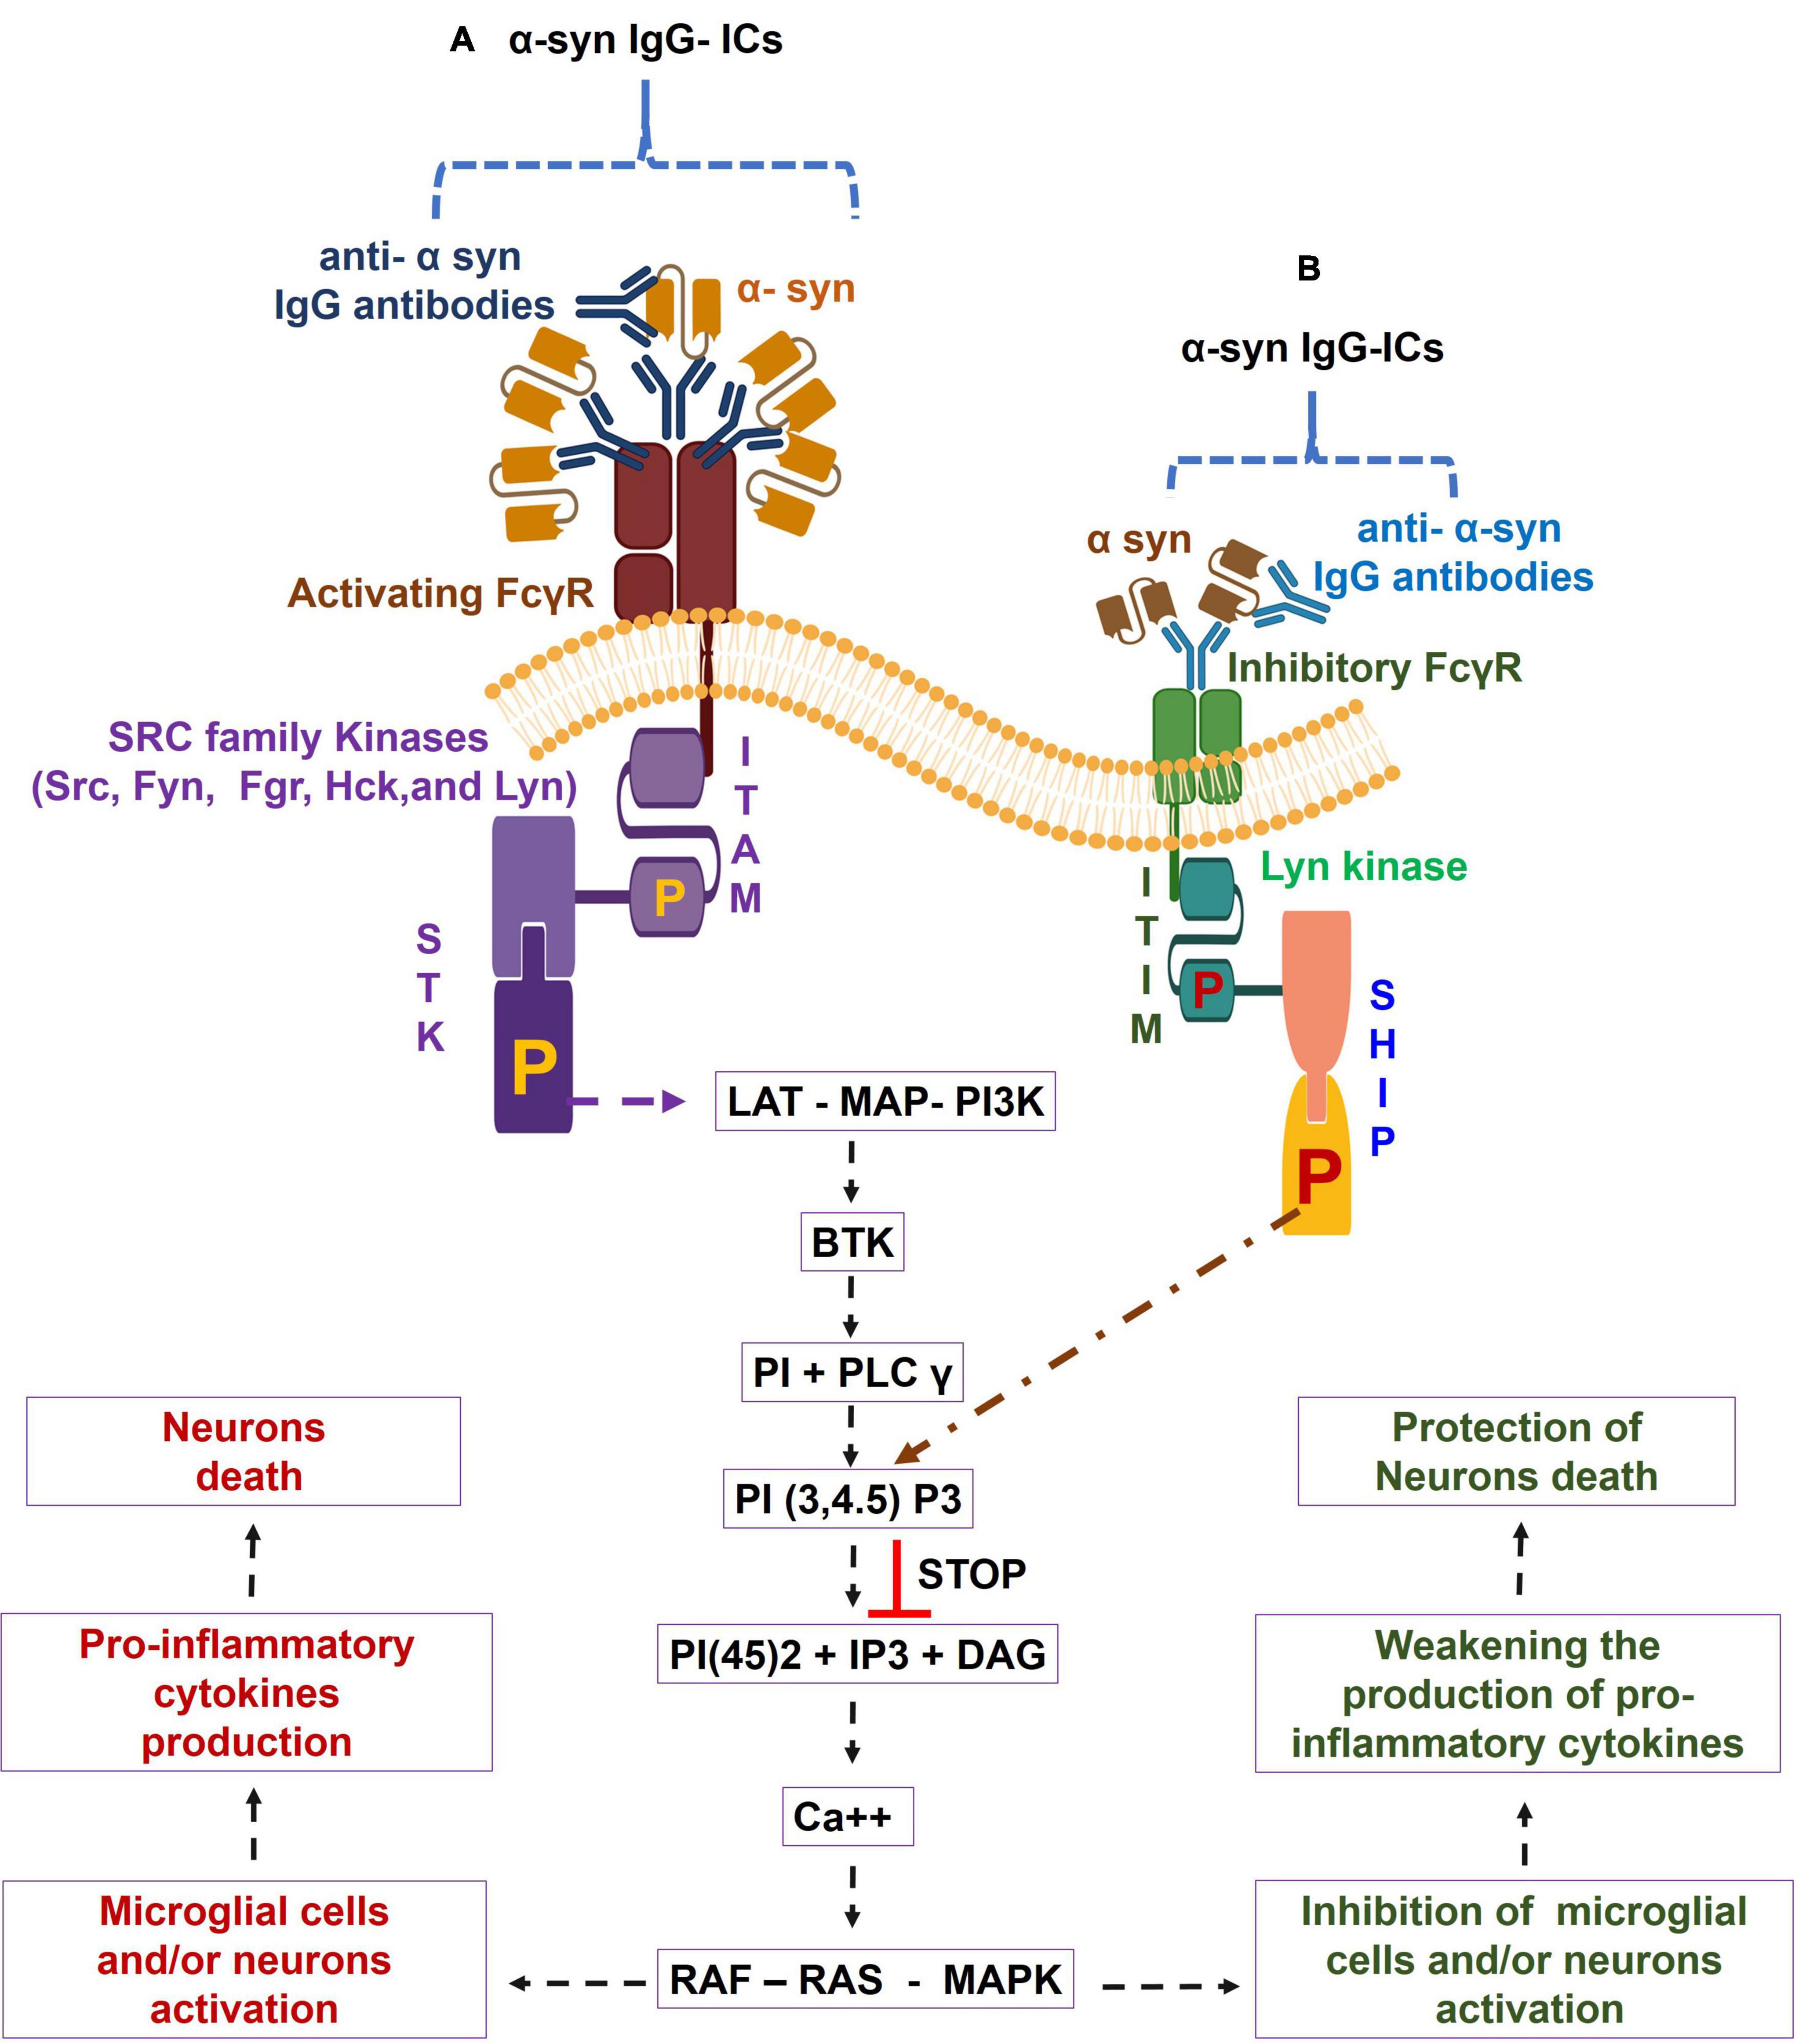 Frontiers | The Role of Alpha-Synuclein Autoantibodies in the Induction of Inflammation and Neurodegeneration in Aged Humans